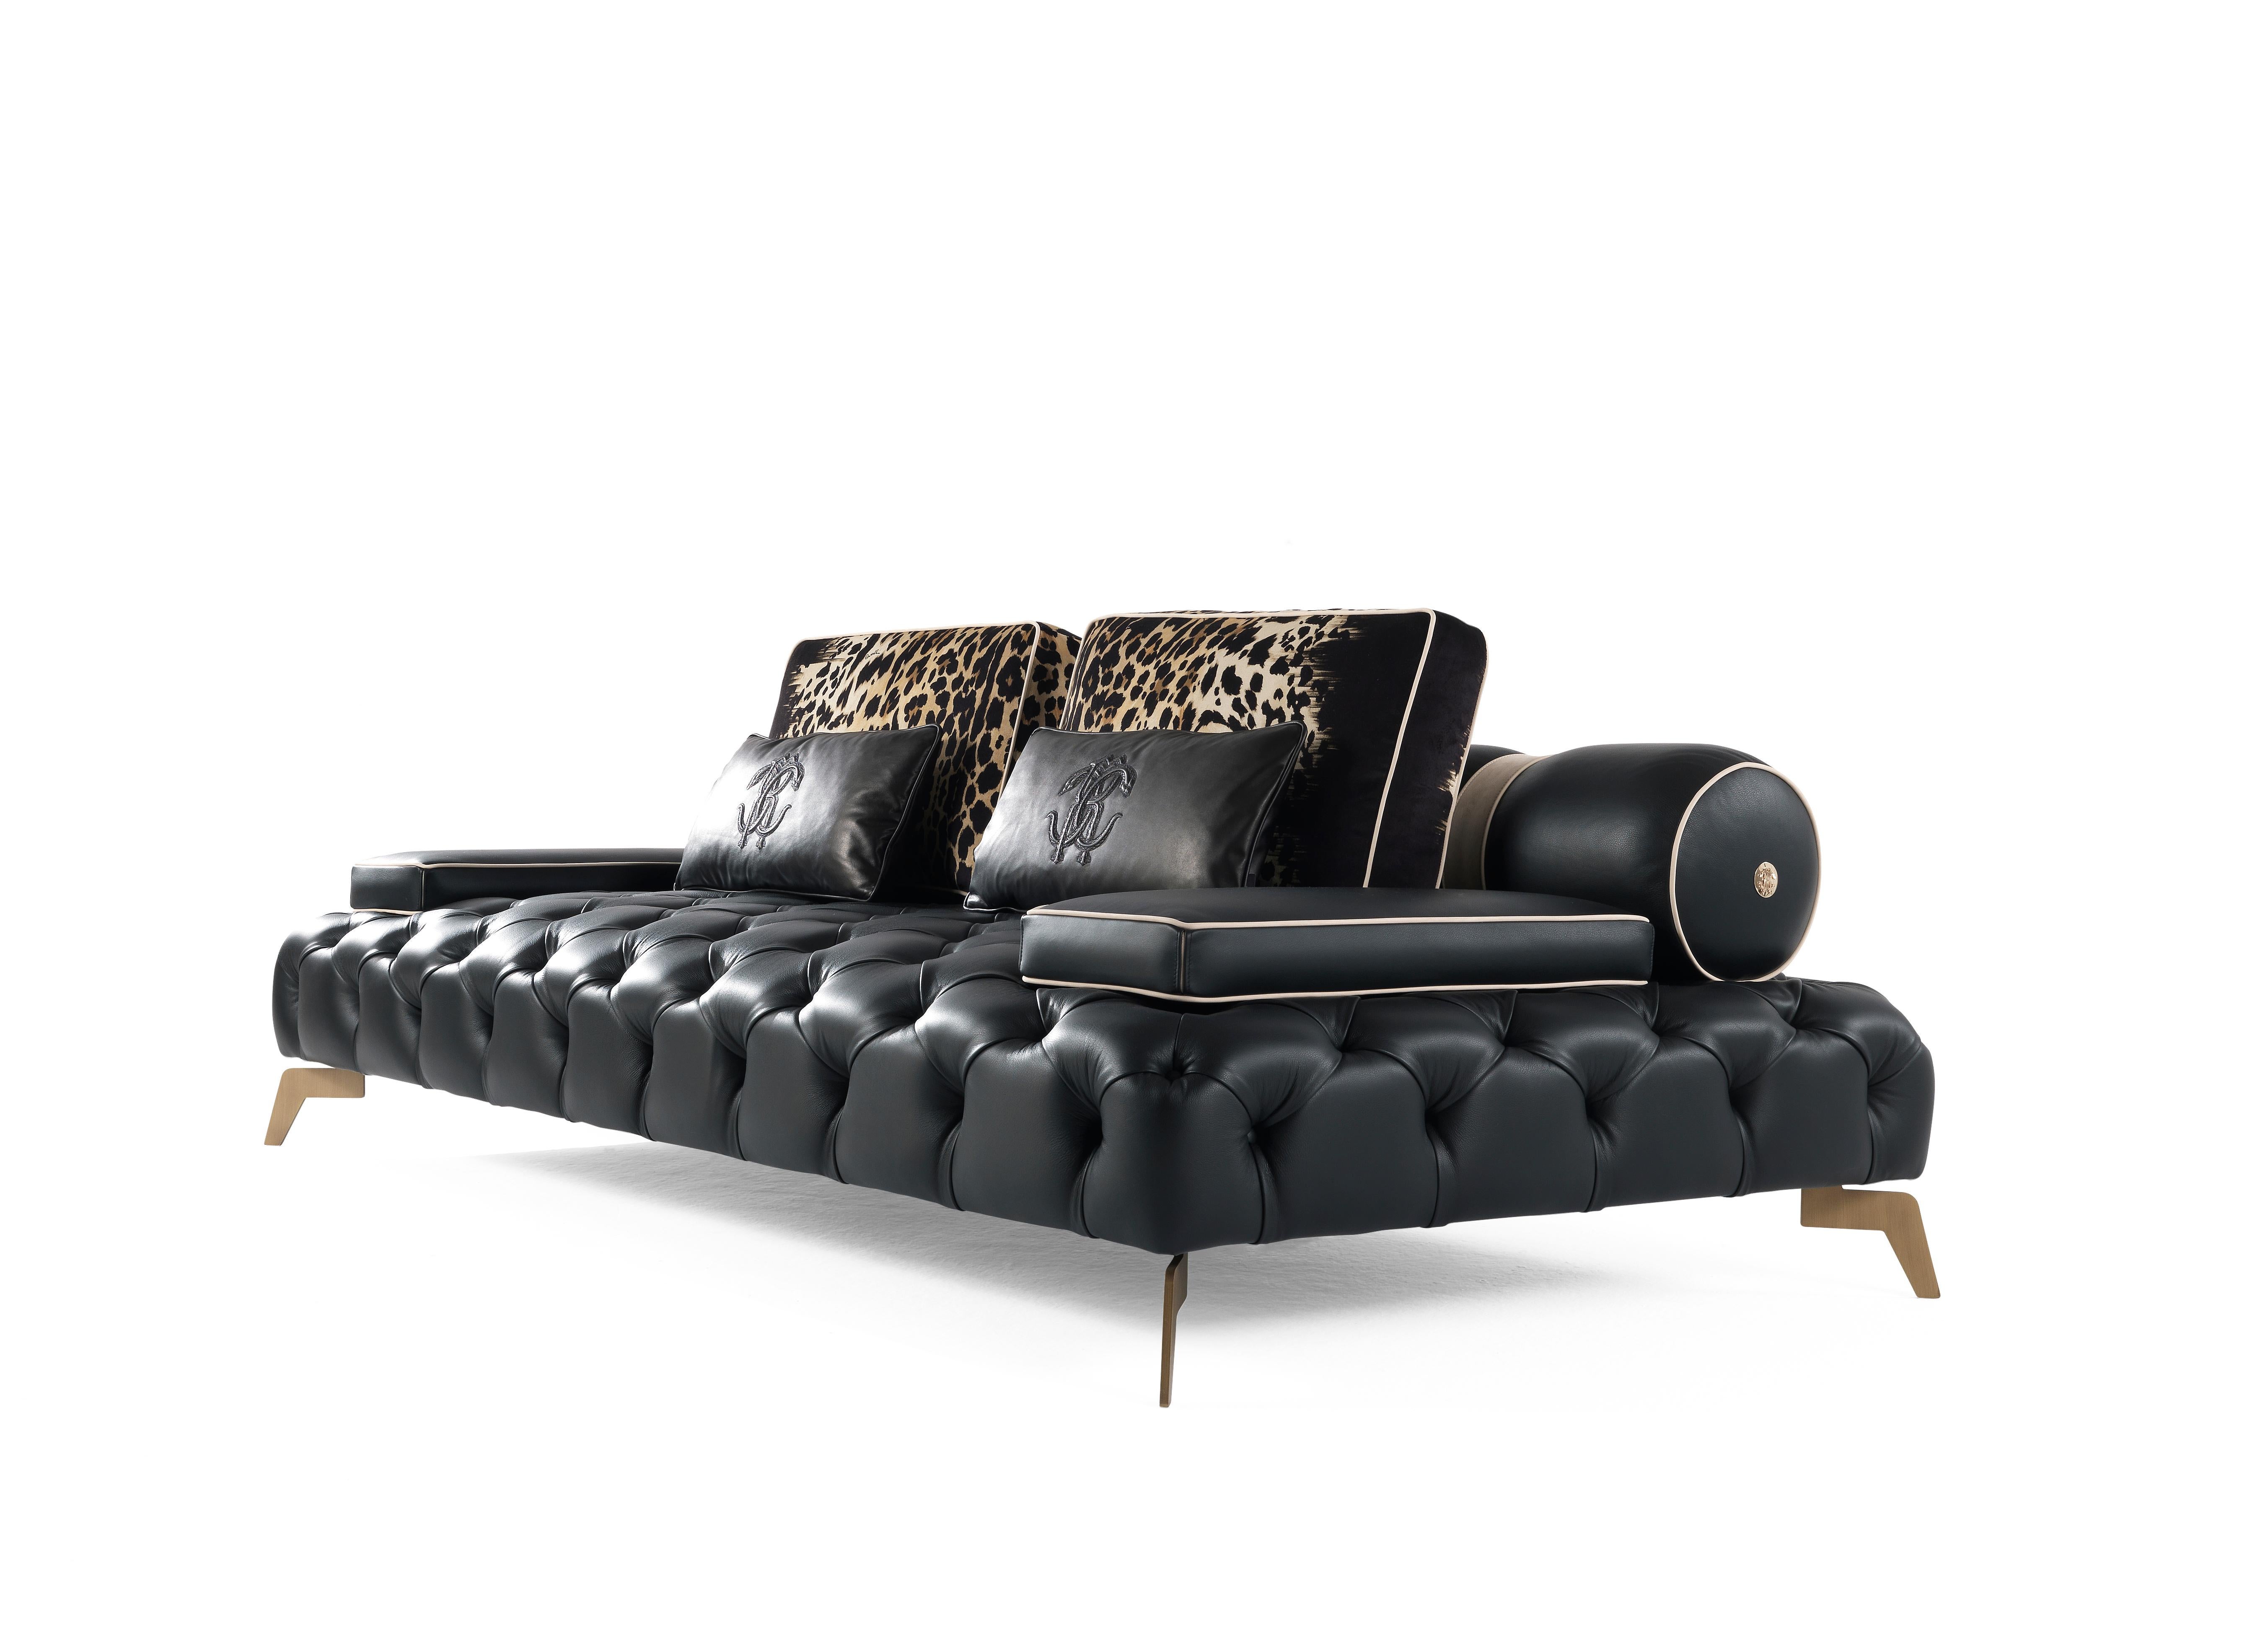 Darlington is an iconic sofa of the Roberto Cavalli Home Interiors collection, characterized by a refined capitonné finishing. This new version is presented with black leather upholstery and piping in cream-colored nubuck, completed by cushions with